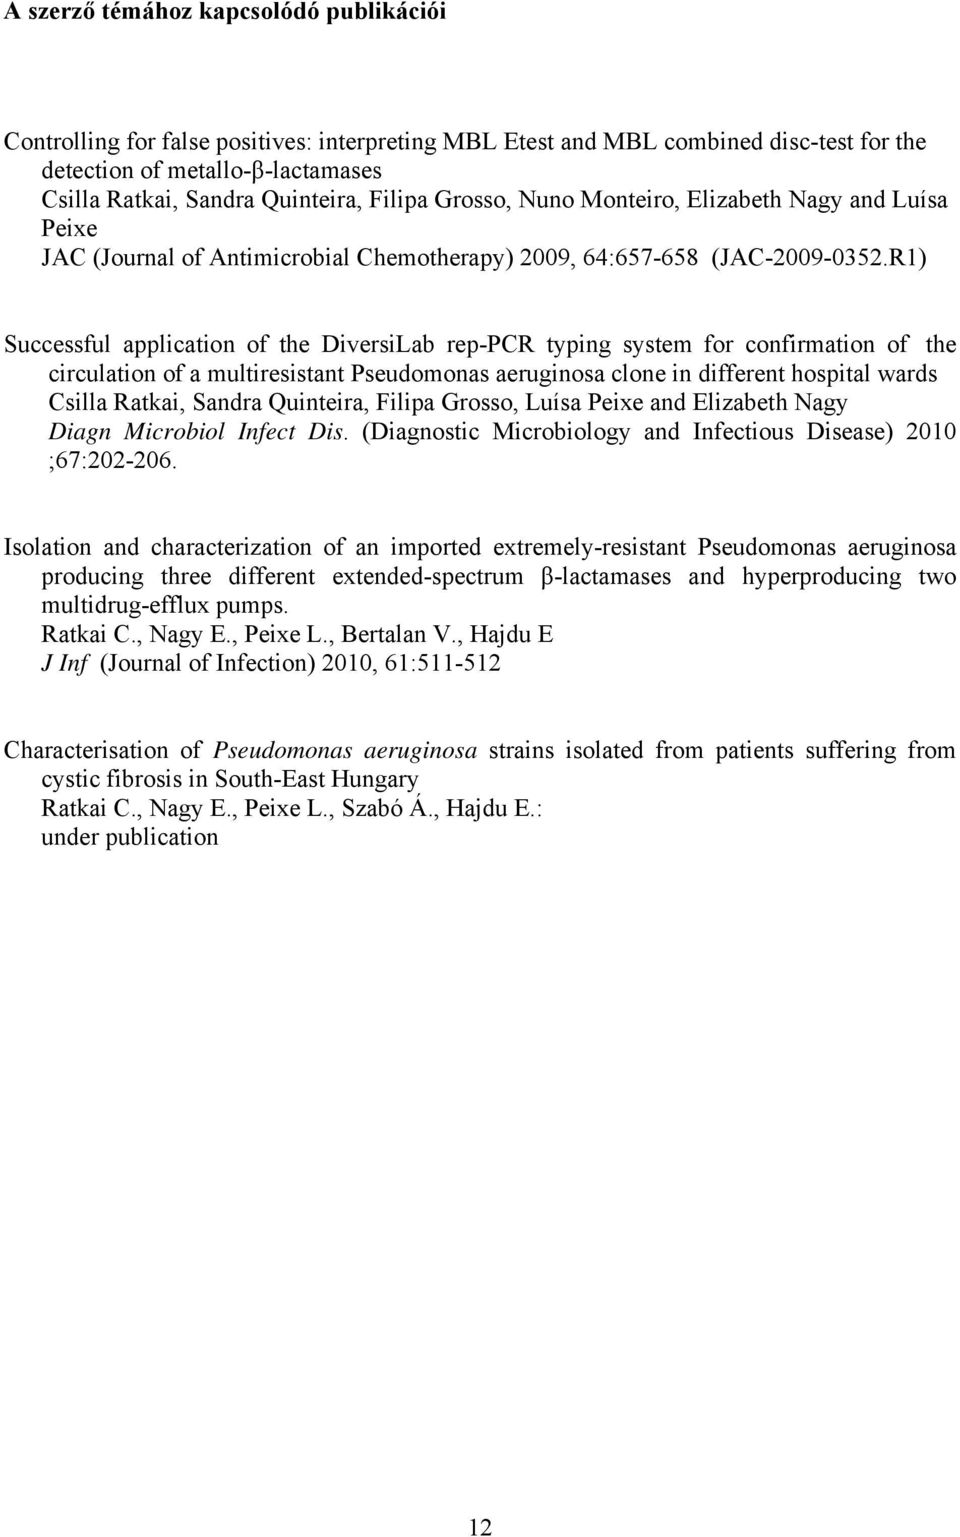 R1) Successful application of the DiversiLab rep-pcr typing system for confirmation of the circulation of a multiresistant Pseudomonas aeruginosa clone in different hospital wards Csilla Ratkai,